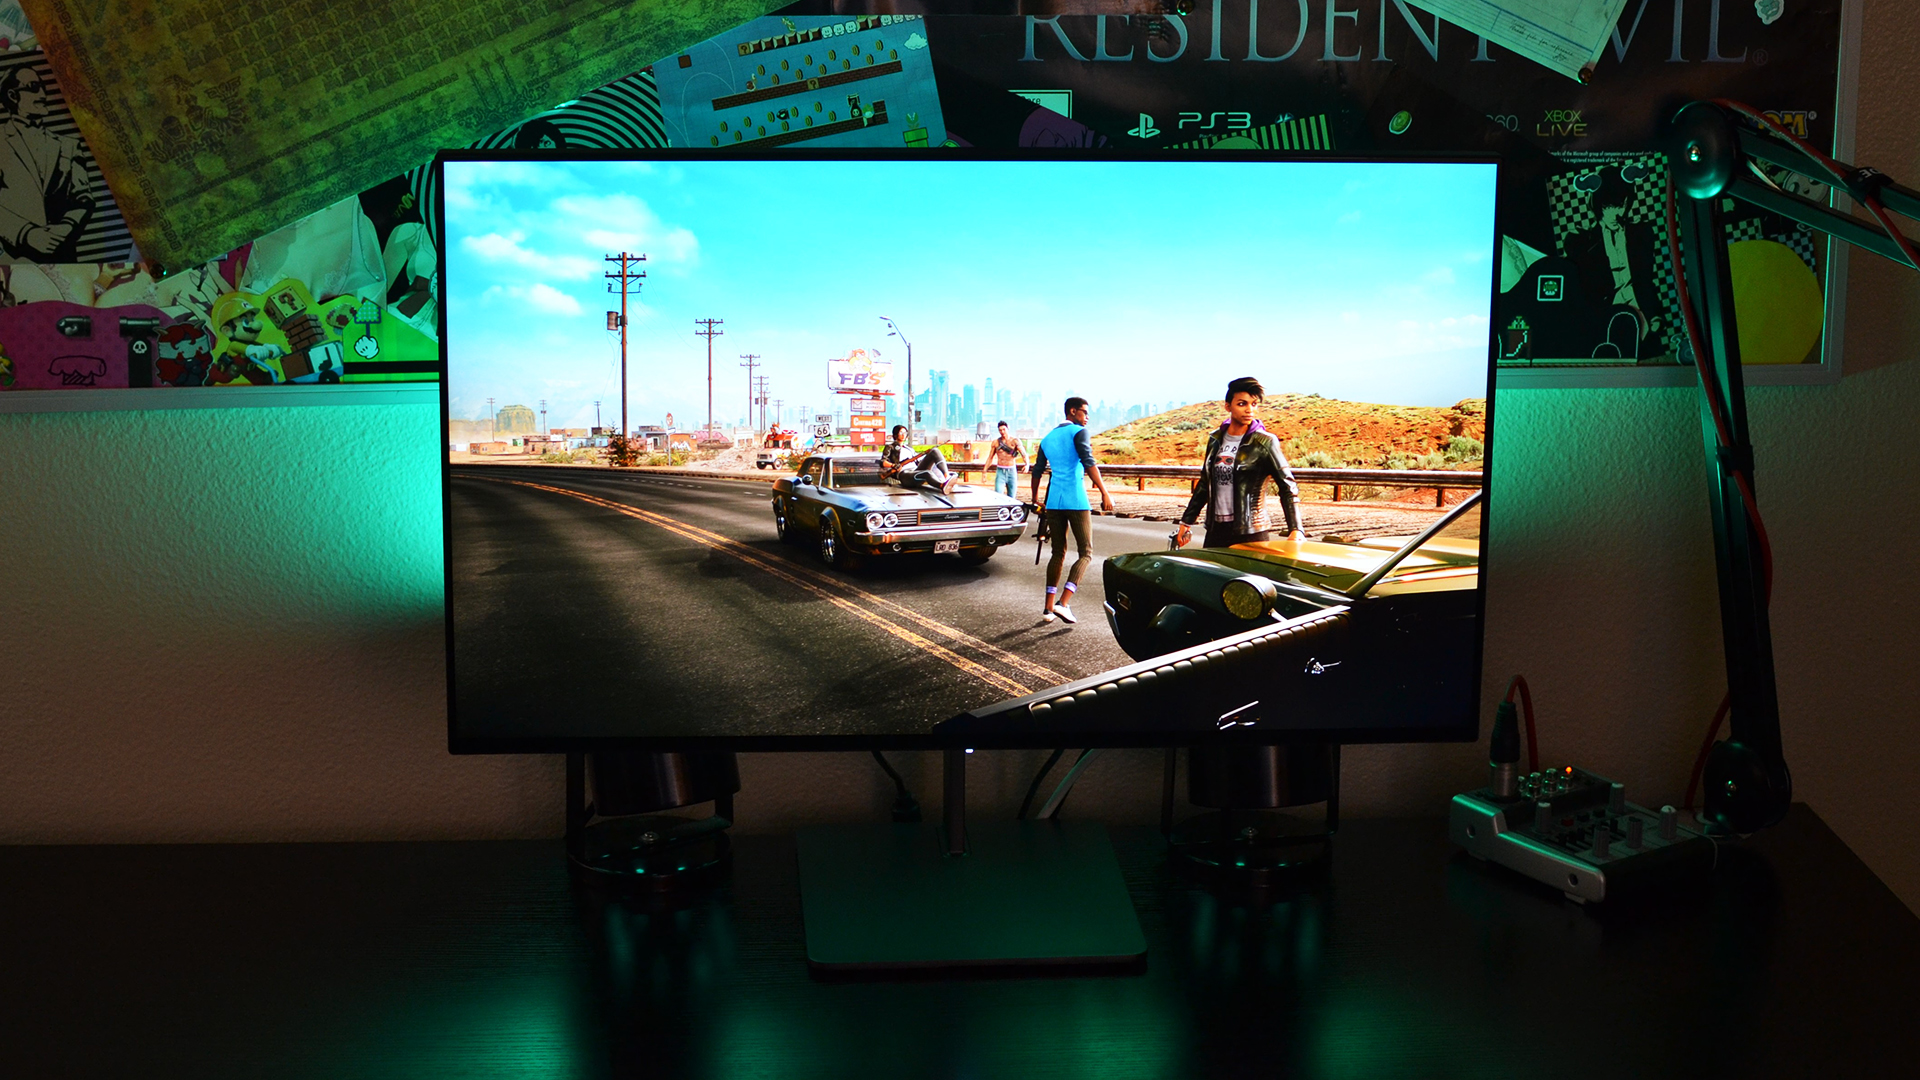 The Dough Spectrum 4K 144Hz glossy monitor is an impressive 